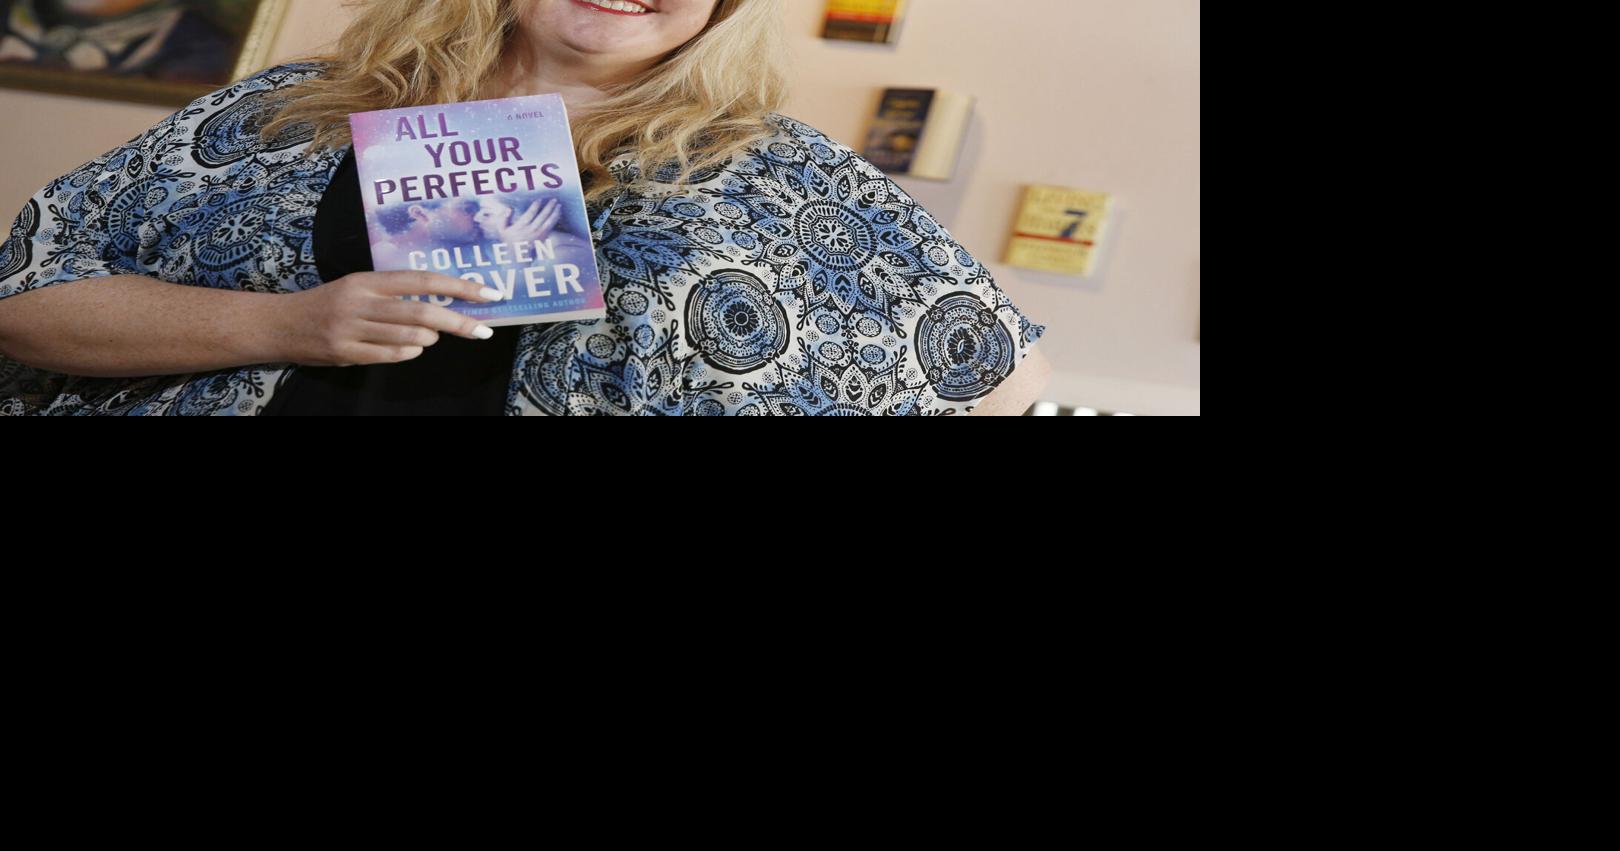 Bestselling author Colleen Hoover has a new novel, 'It Starts With Us' : NPR